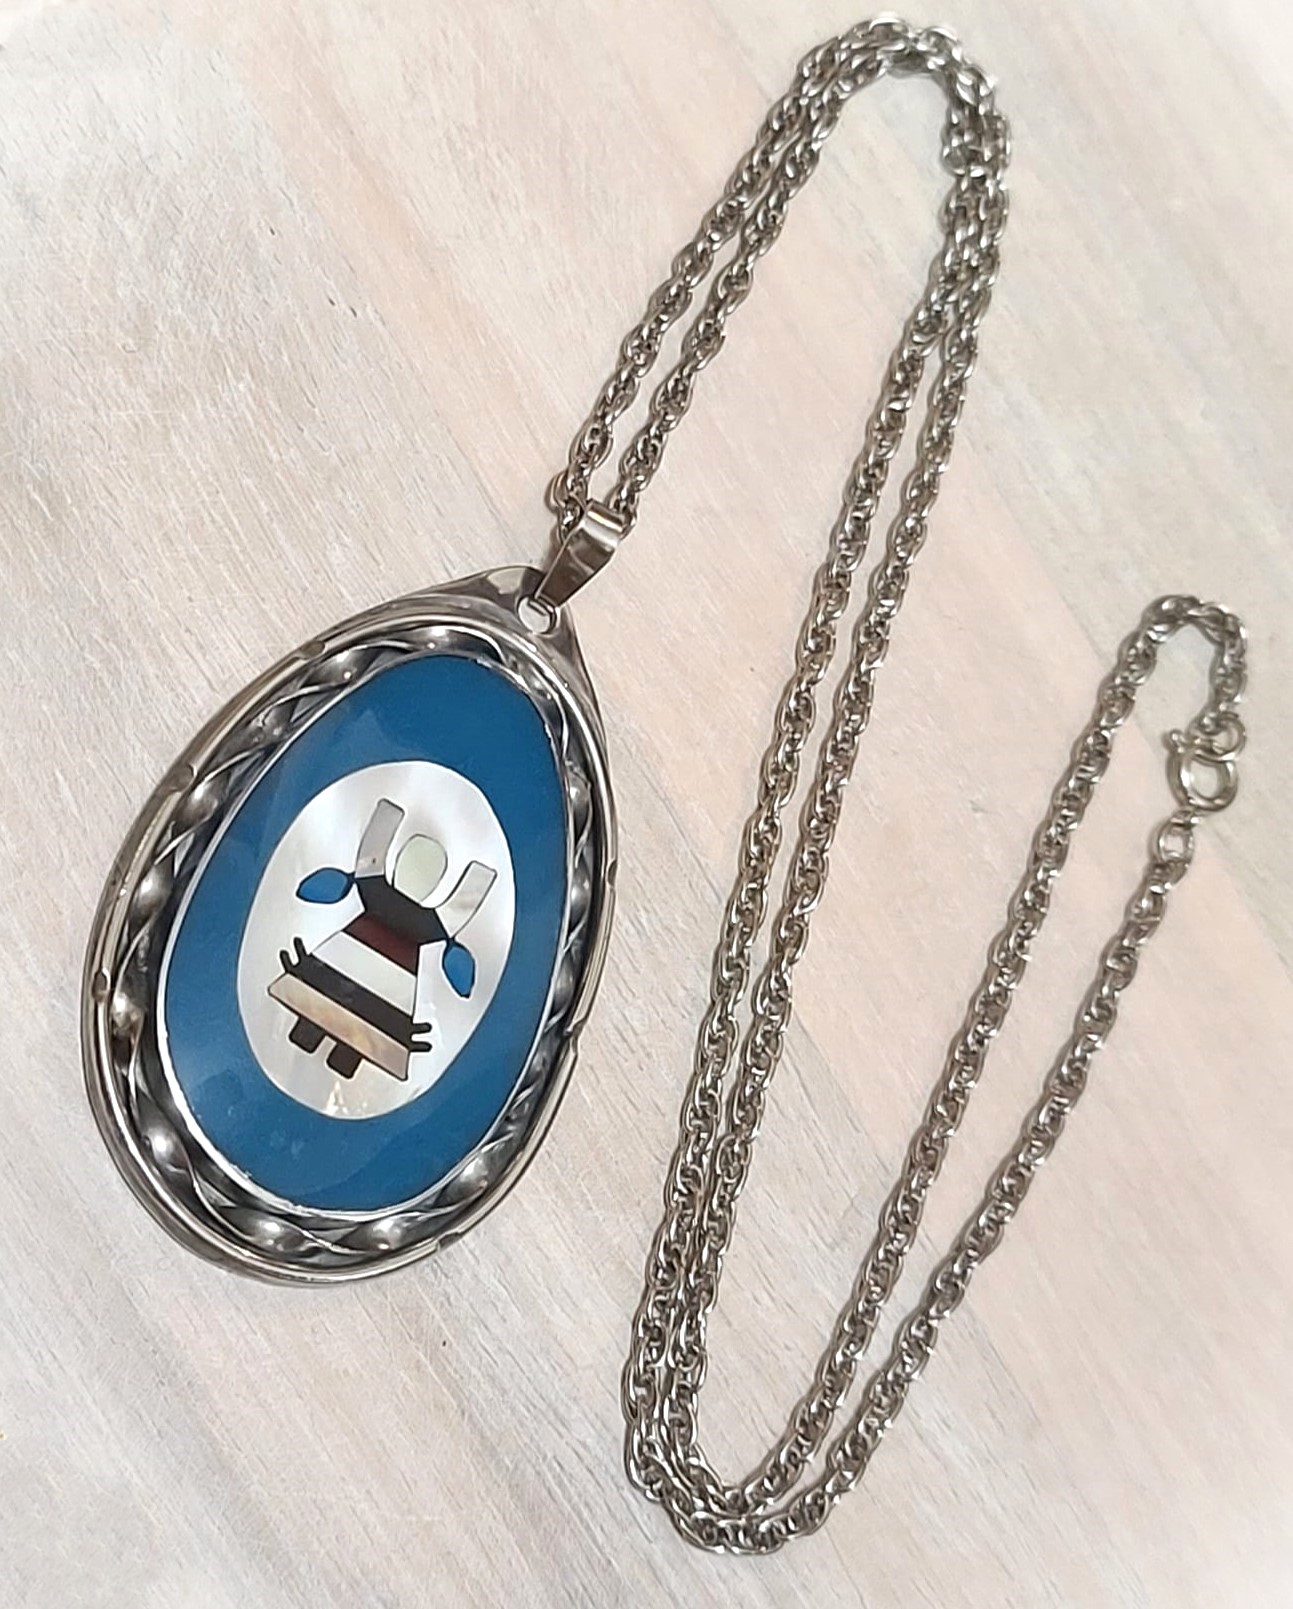 Philippine ethnic pendant necklace, with shell inlay and enamel, vintage pendant necklace